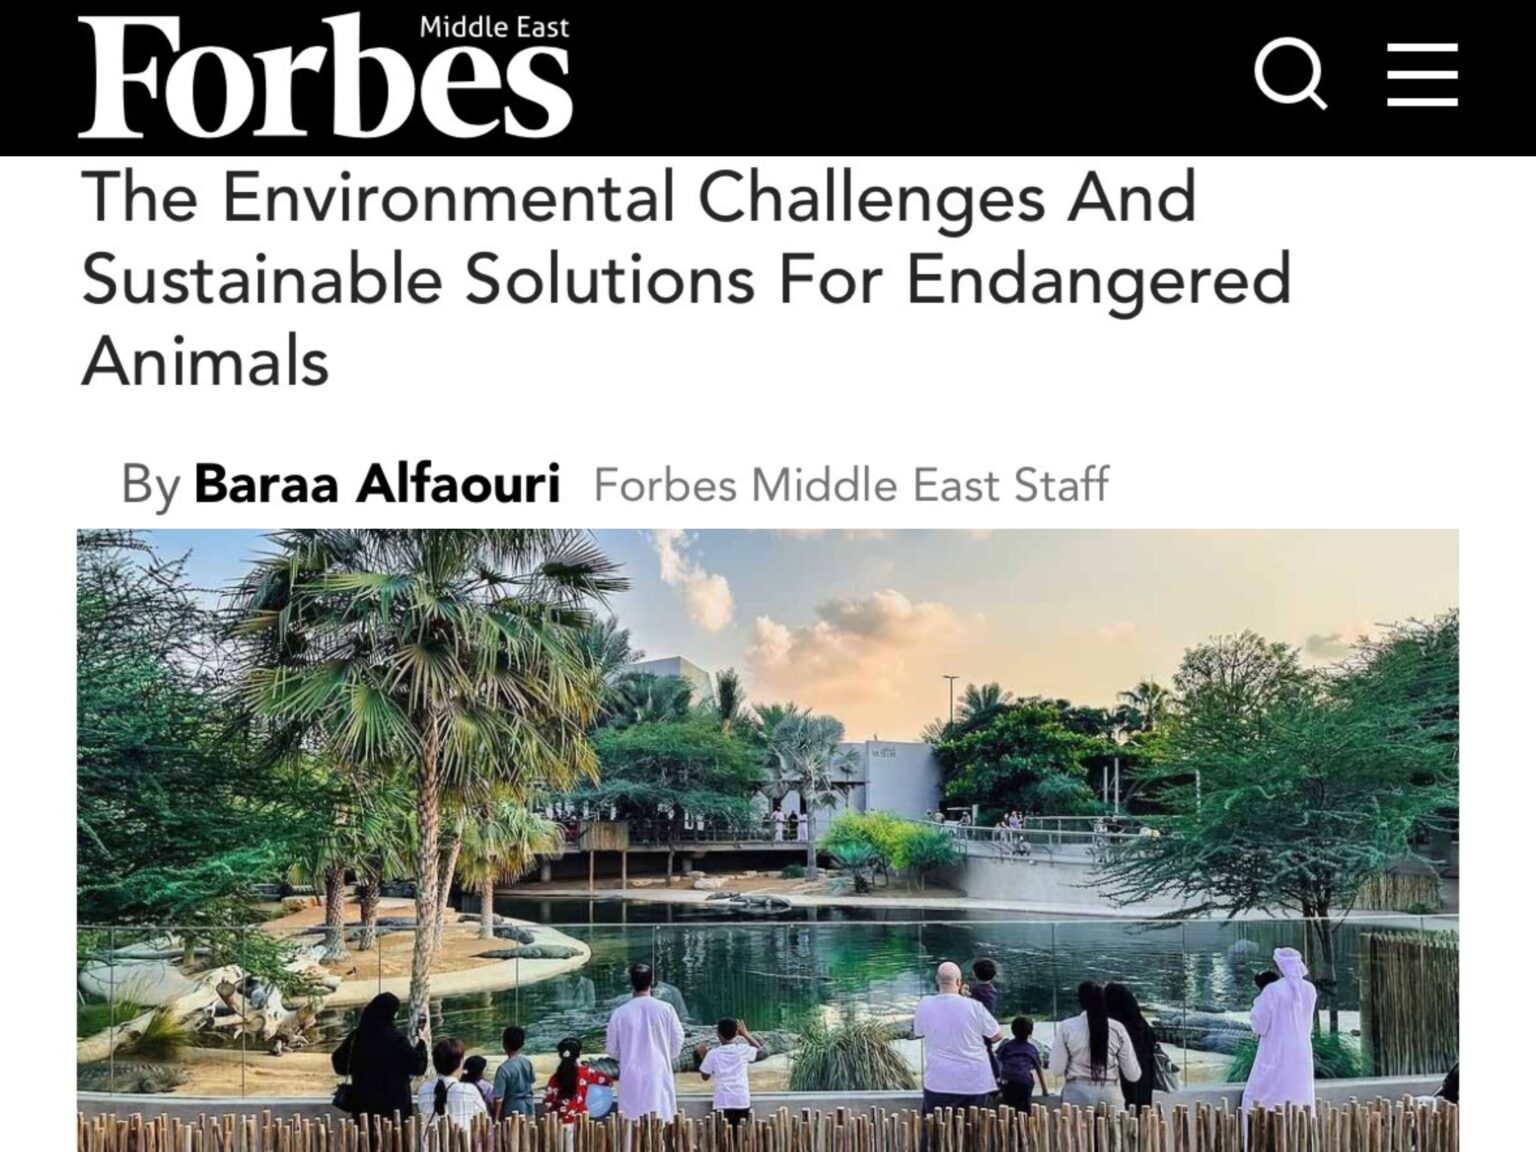 Forbes Middle East article explores the challenges these creatures face and the solutions we can implement to protect them.